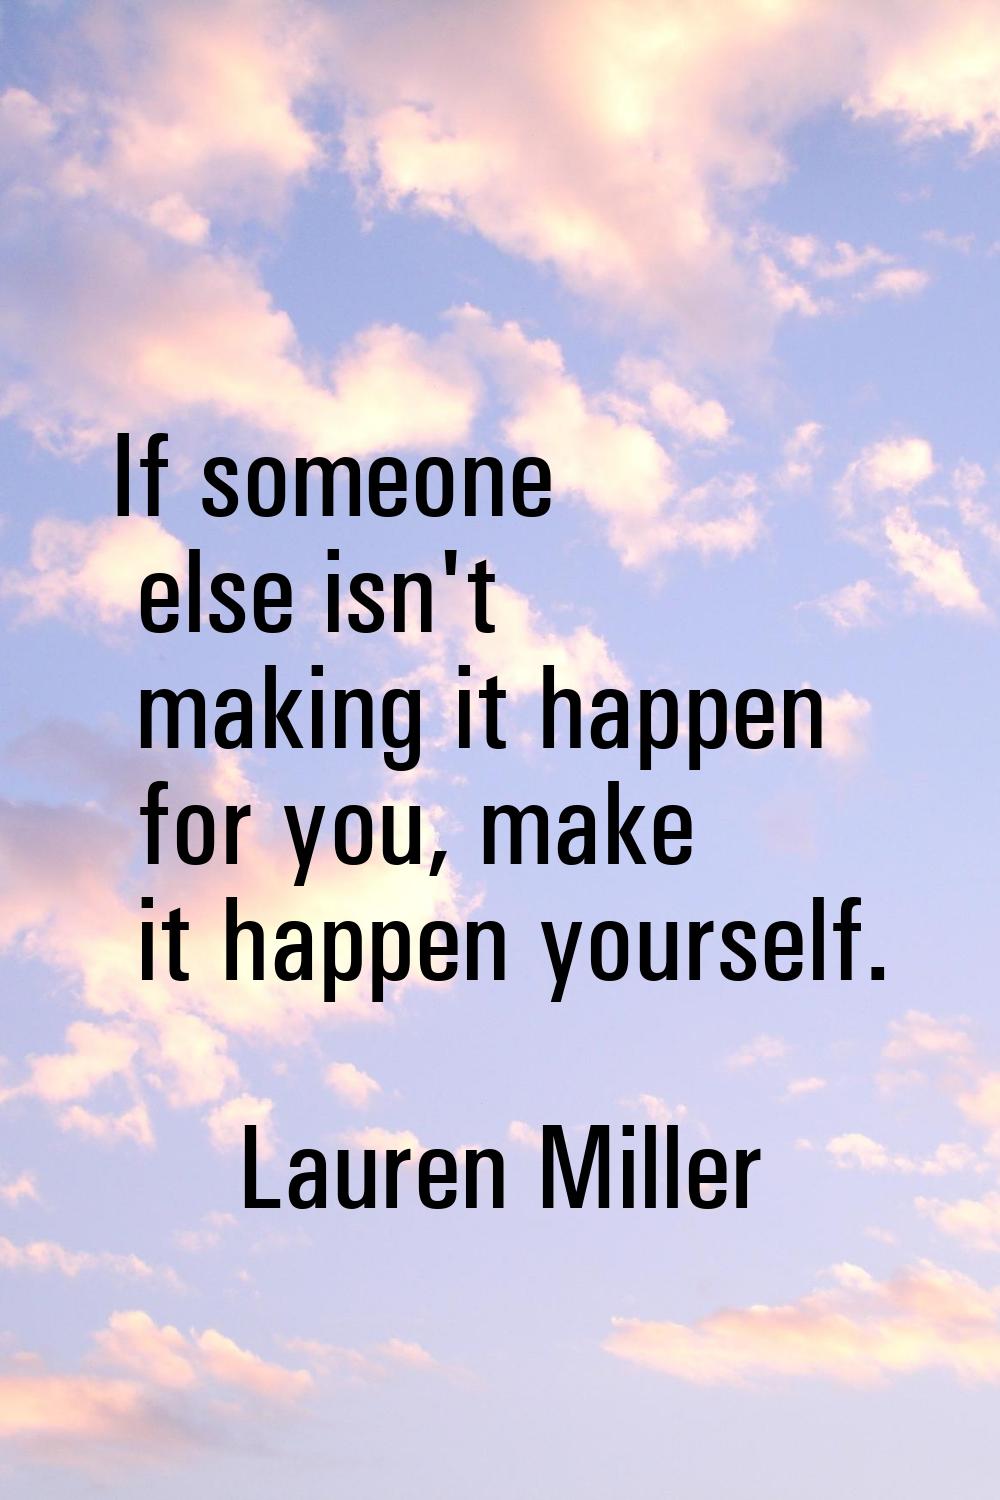 If someone else isn't making it happen for you, make it happen yourself.